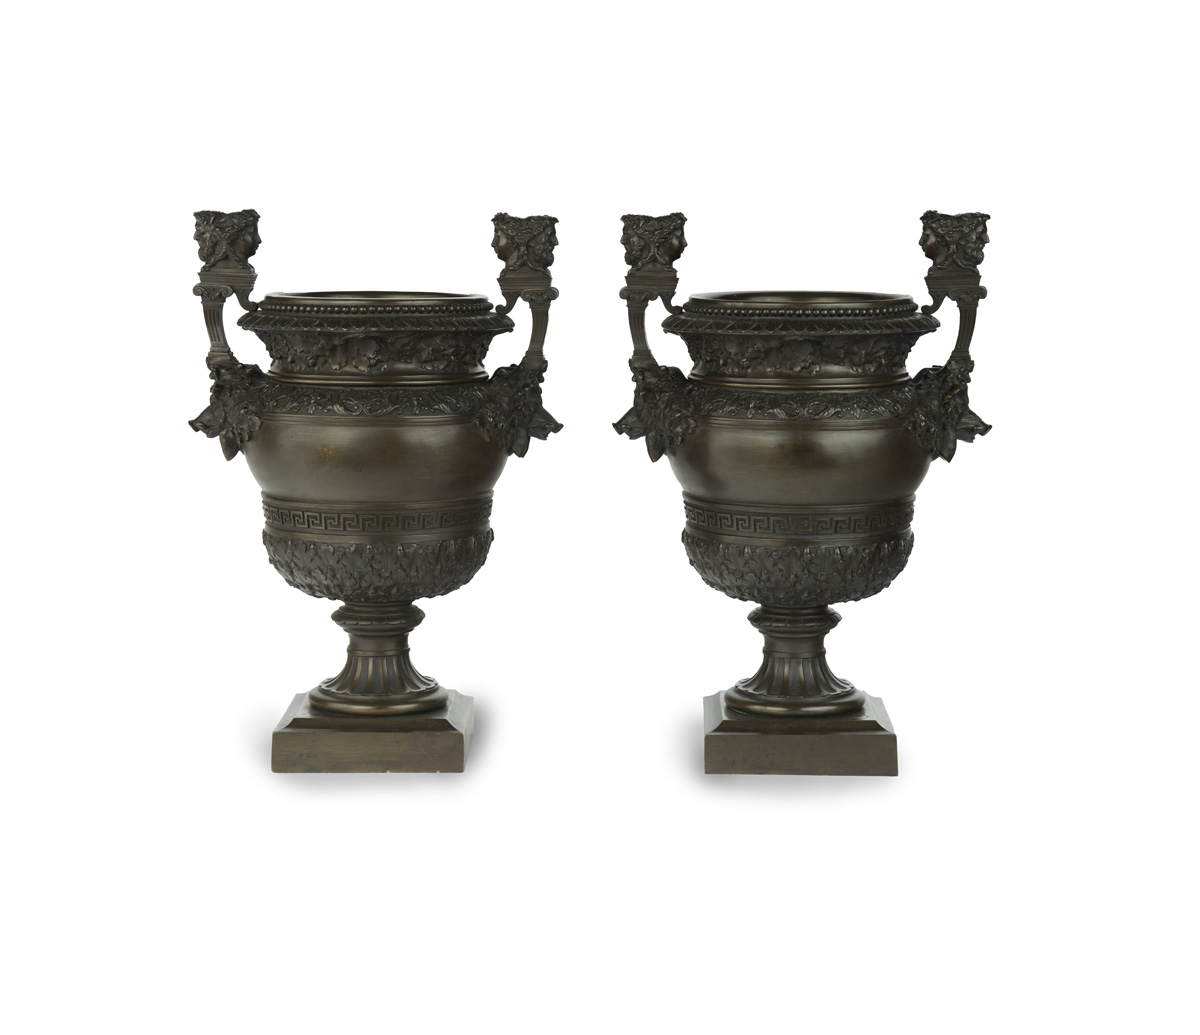 A pair of Belgian bronze urns by Luppens, Brussels